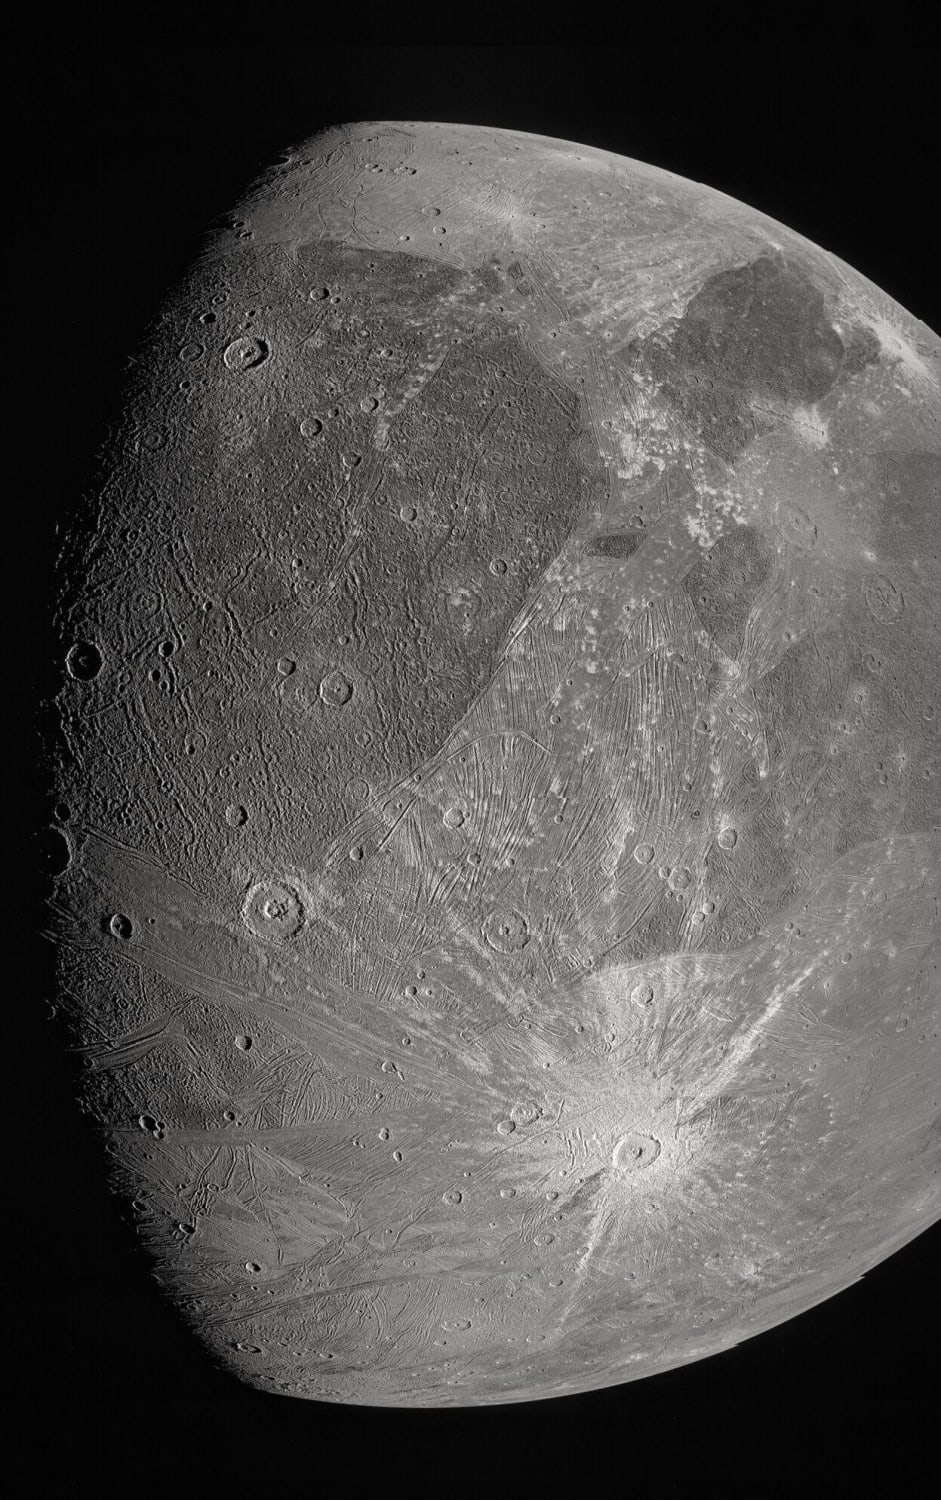 This image of Ganymede was obtained by NASA's Juno Spacecraft JunoCam imager during a flyby of the icy moon on 7 June 2021.